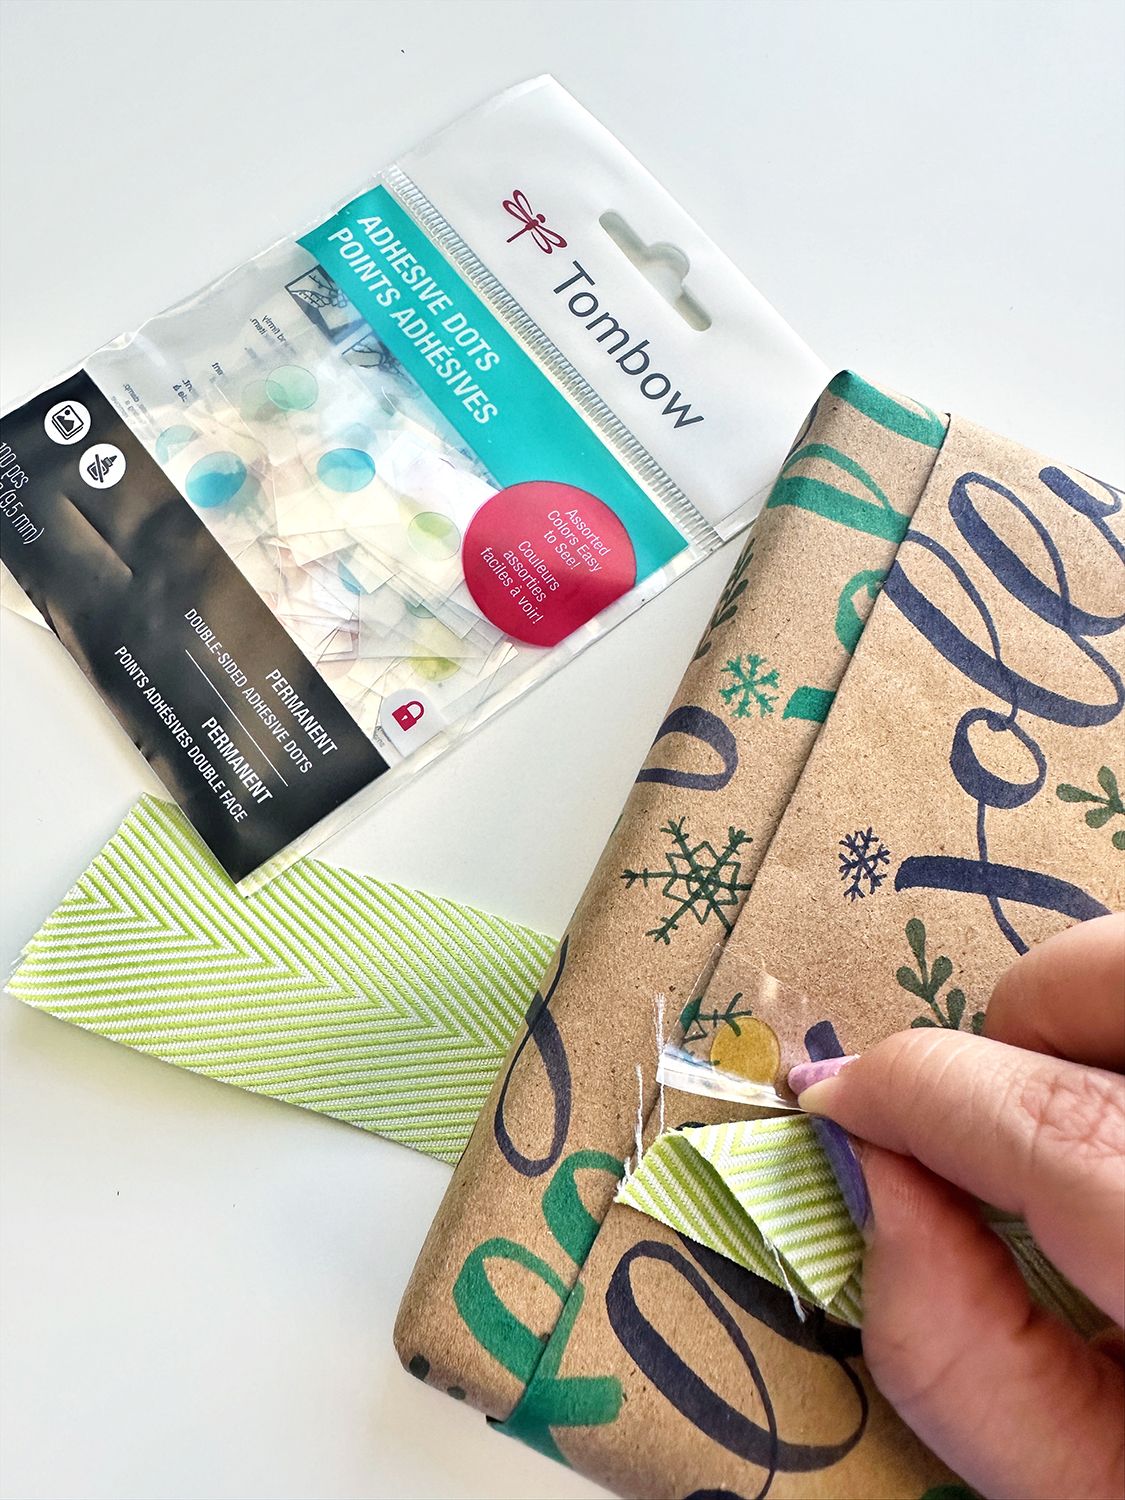 Use Tombow Adhesive Dots to glue ribbon on gift wrapping. #tombow #giftwrapping